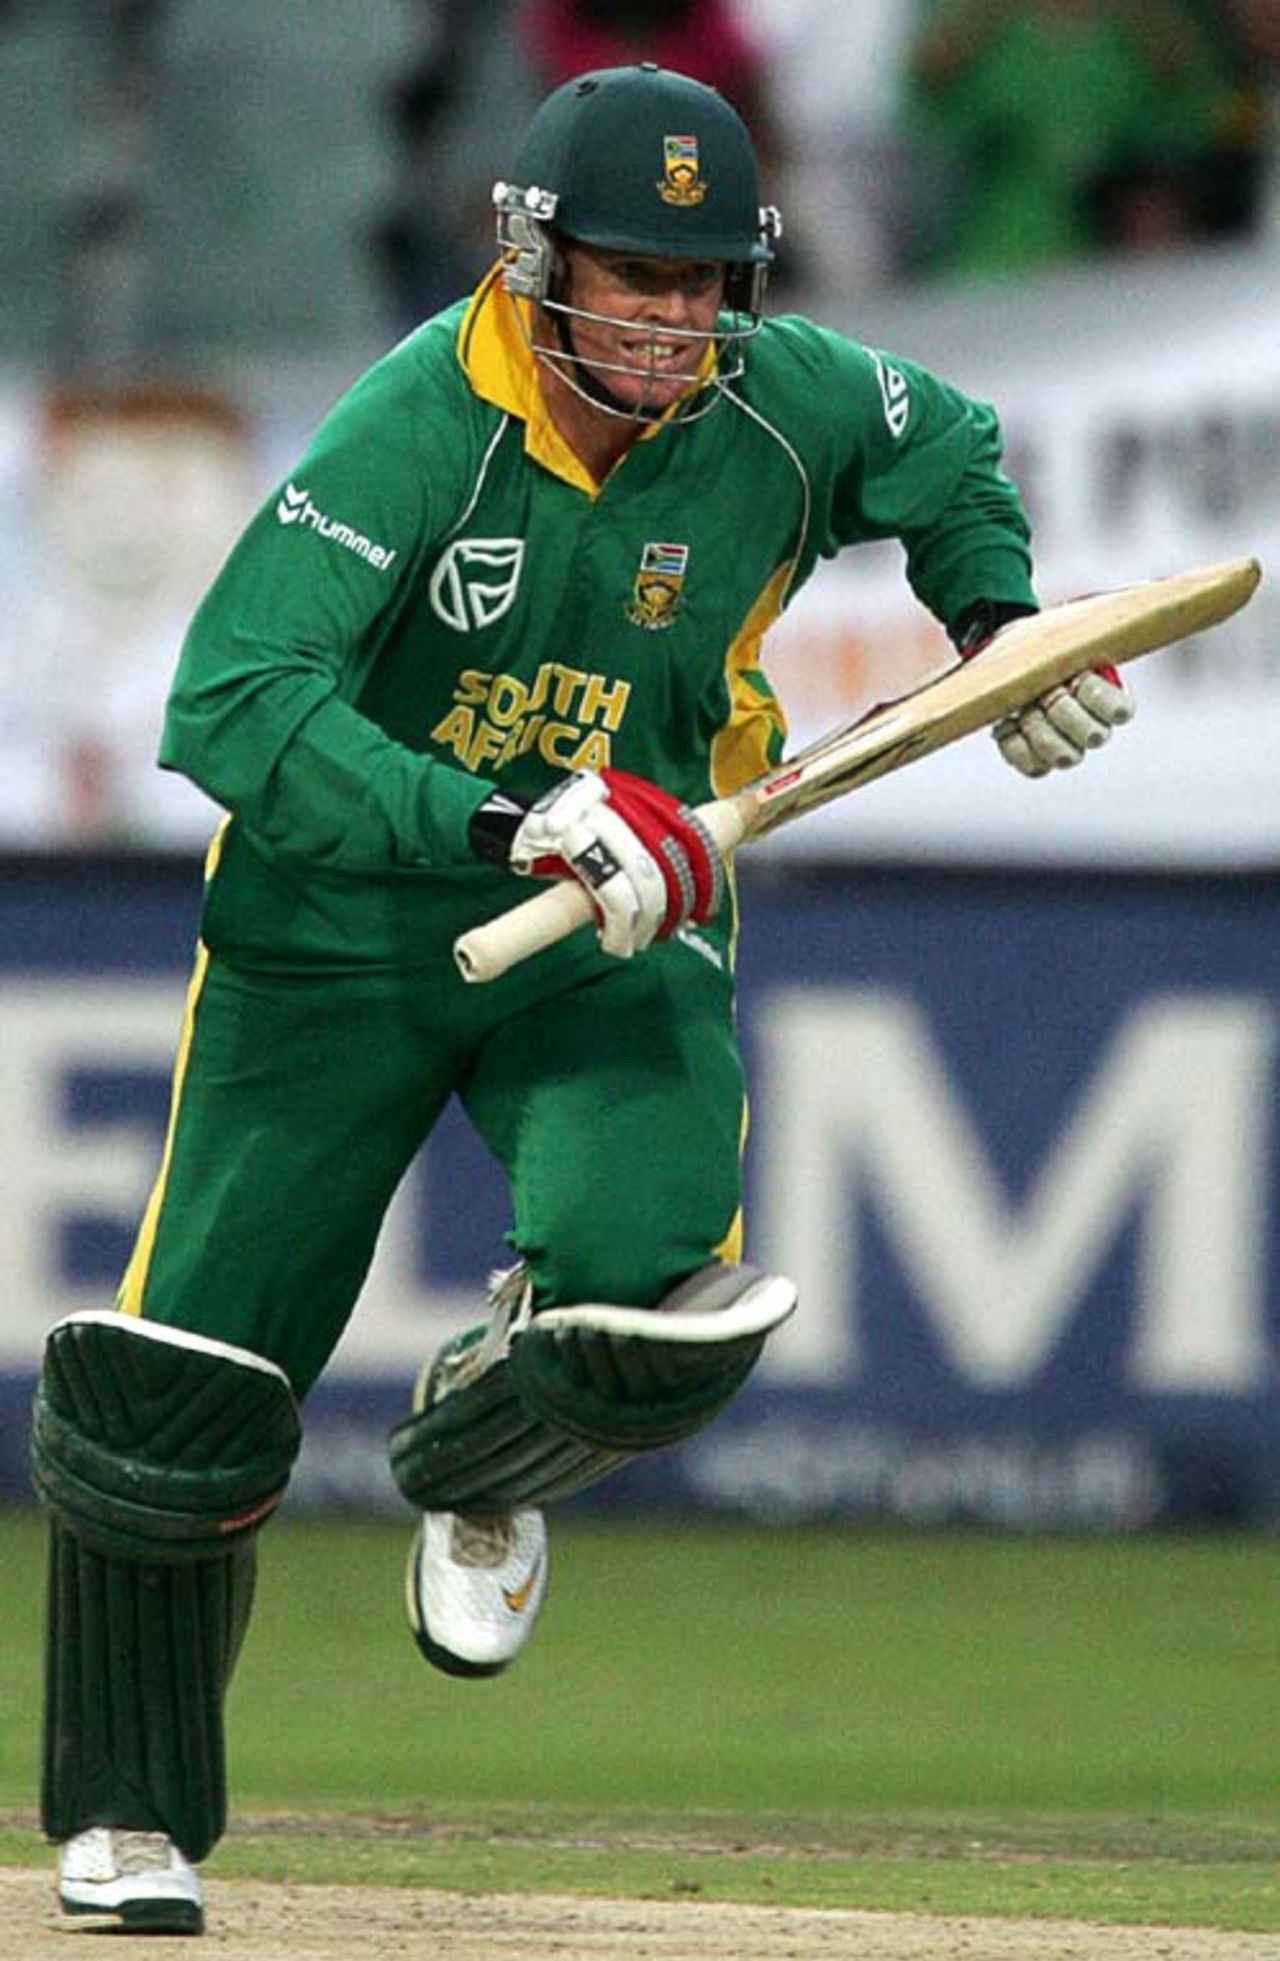 Shaun Pollock charges at full steam for the winning runs, 5th ODI, Johannesburg, February 3, 2008